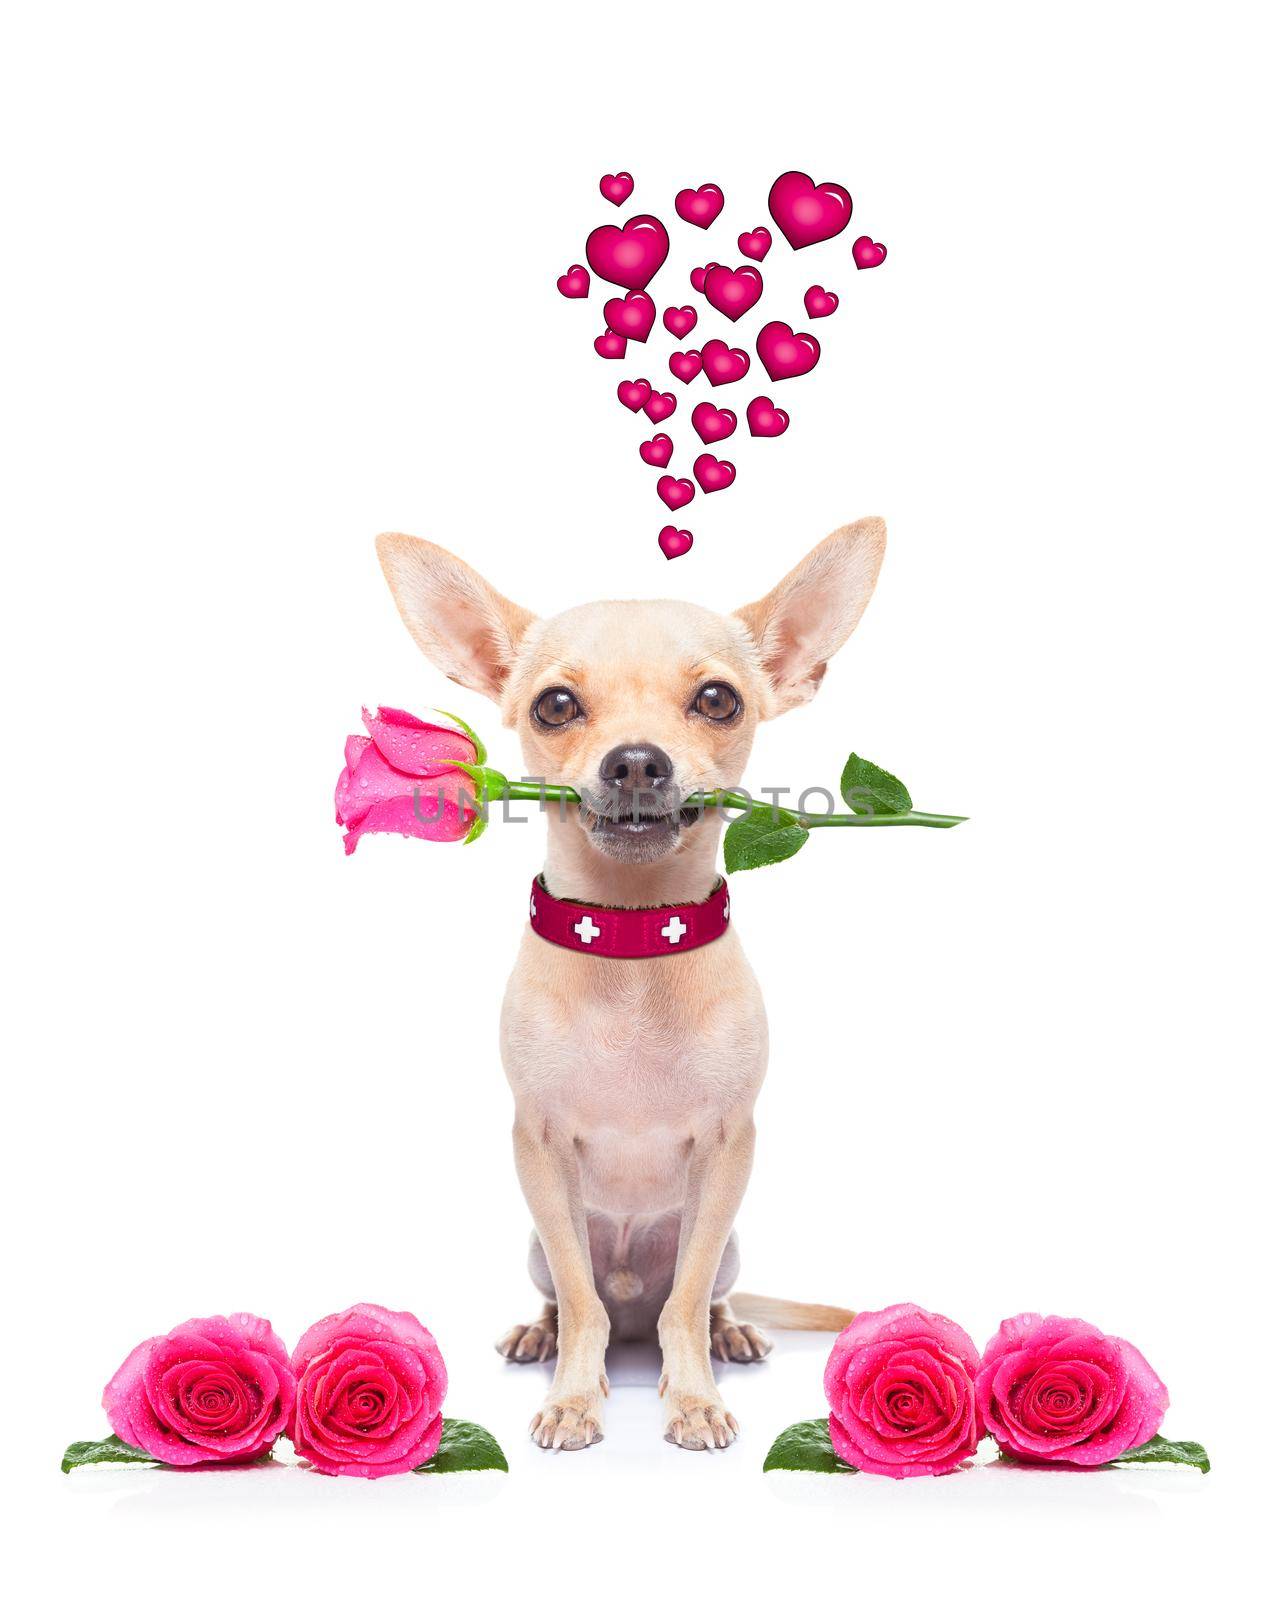 pug chihuahua dog, staring at you   , with a valentines rose in mouth,  isolated on white background